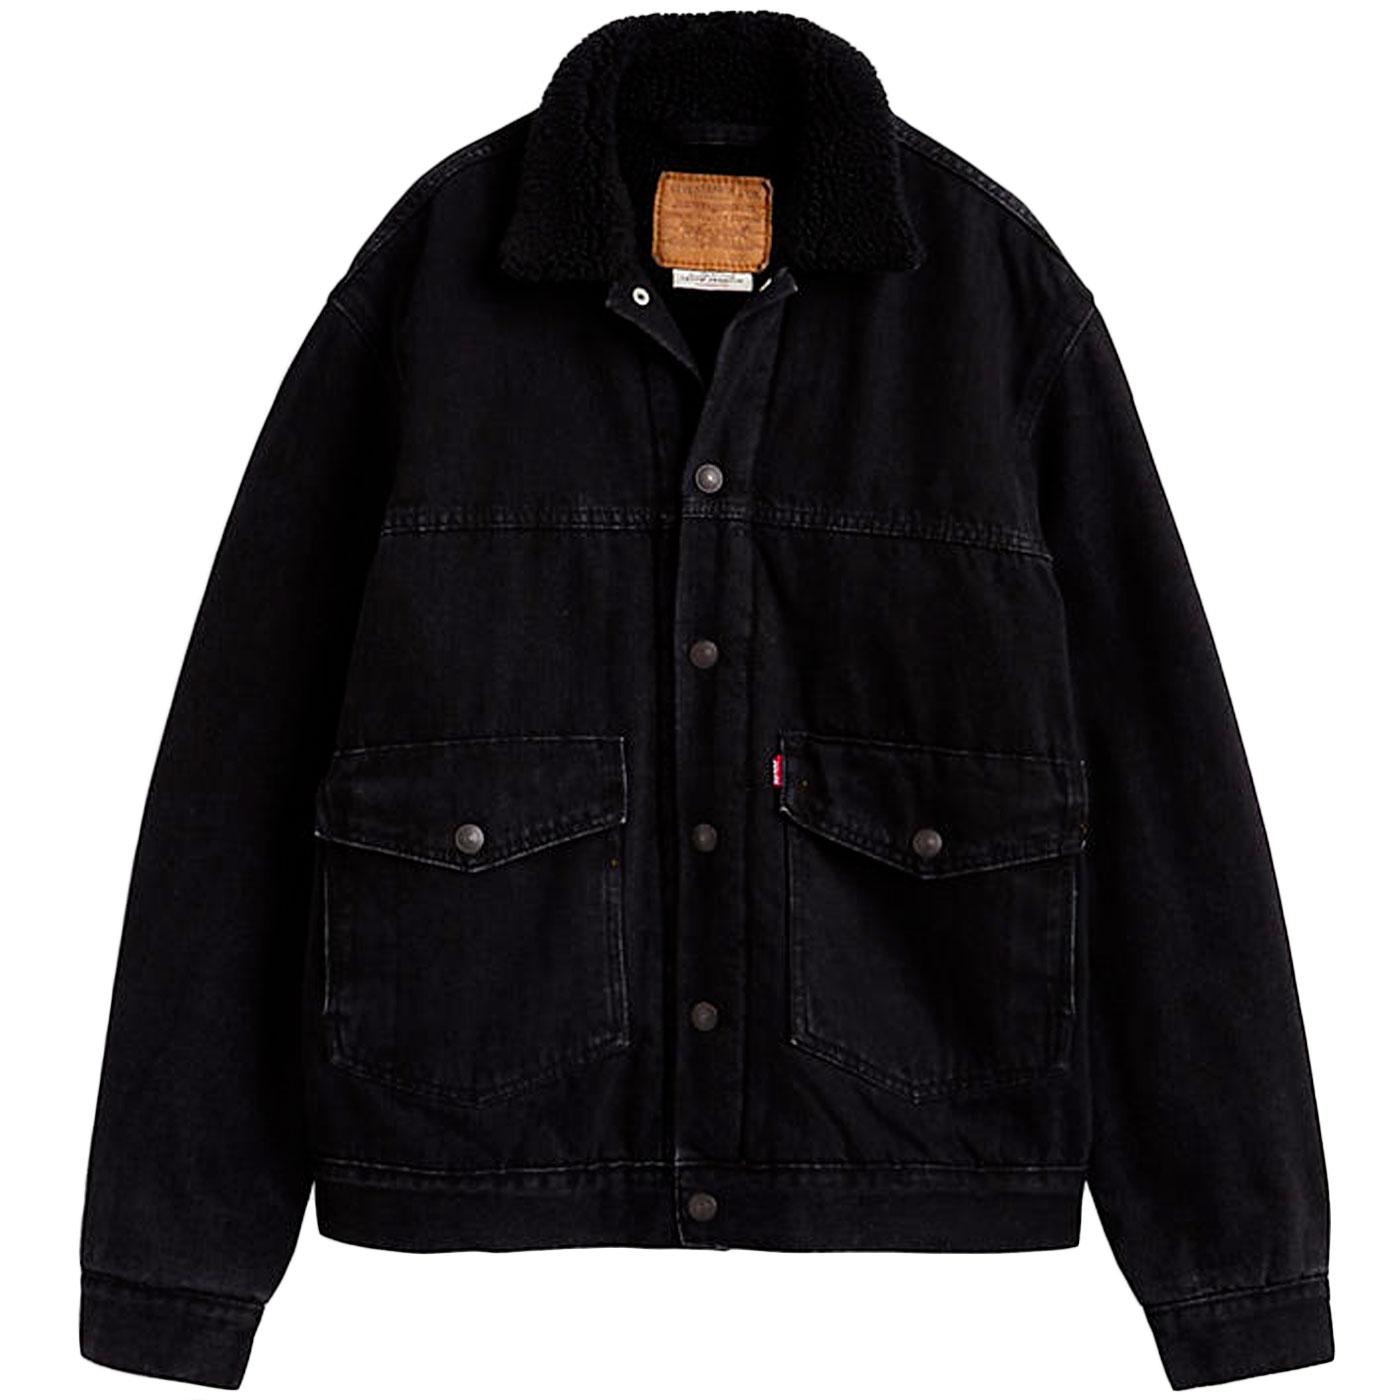 patched sherpa trucker jacket